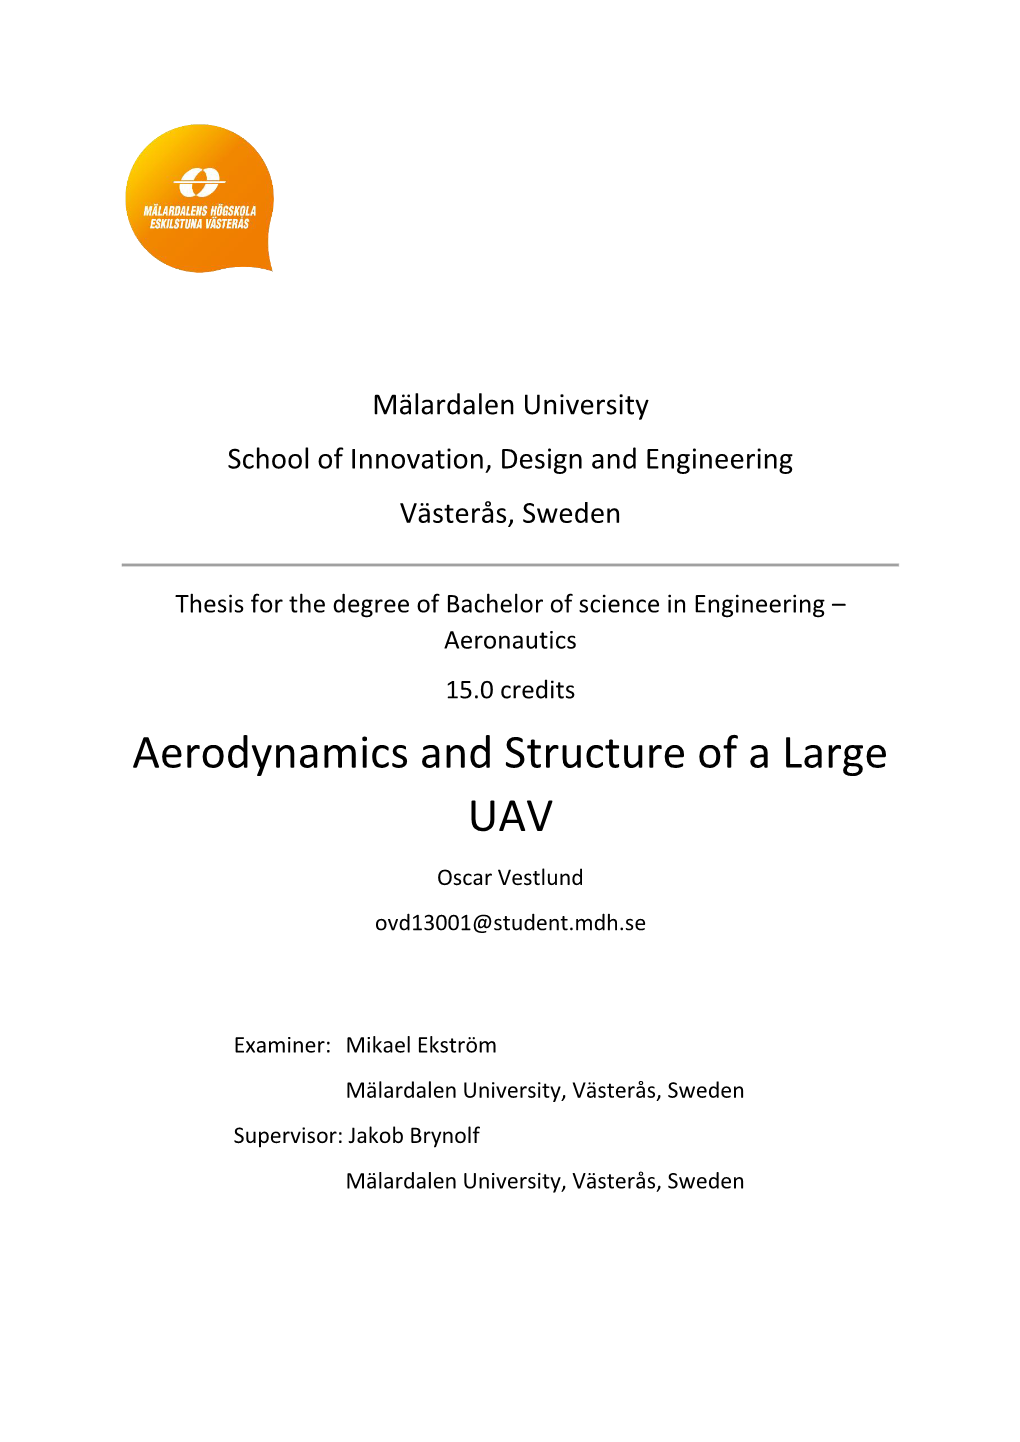 Aerodynamics and Structure of a Large UAV